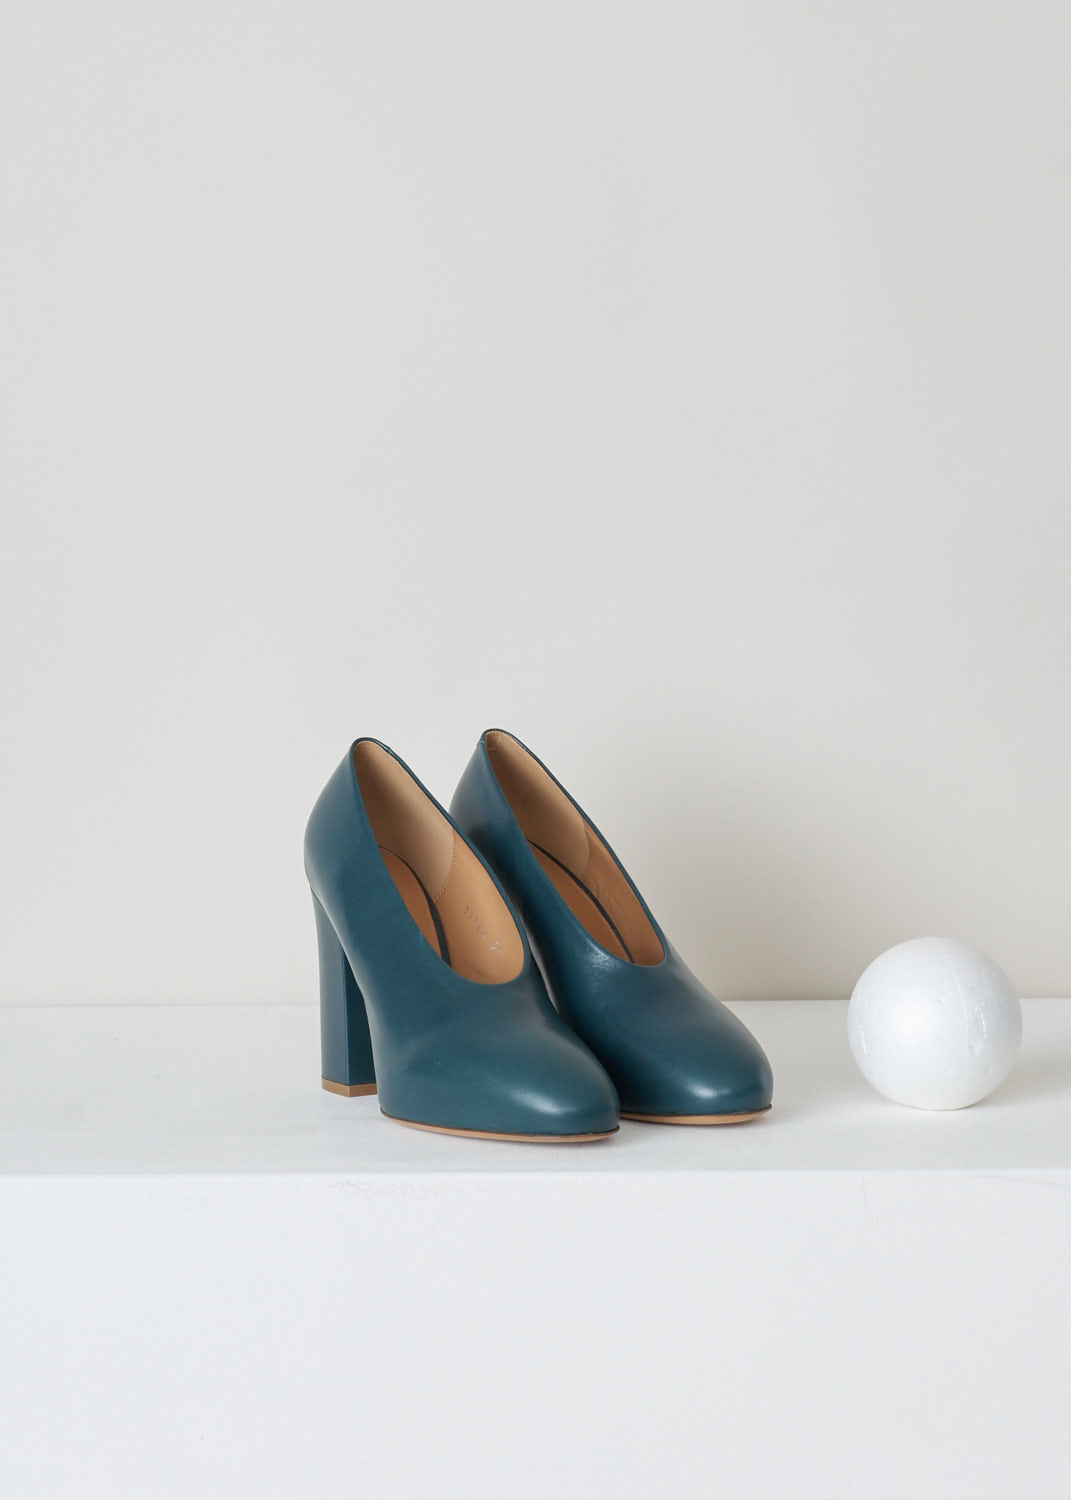 Dries van Noten, Dark aqua color platform pumps, WS26_765_H80_QU303_aqua500, blue, front, Crafted from leather colored in a dark aqua tint. featuring a platform to raise the height of the pump. Comes with a round toe section. 

Heel height: 10 cm / 3.9 inch. 